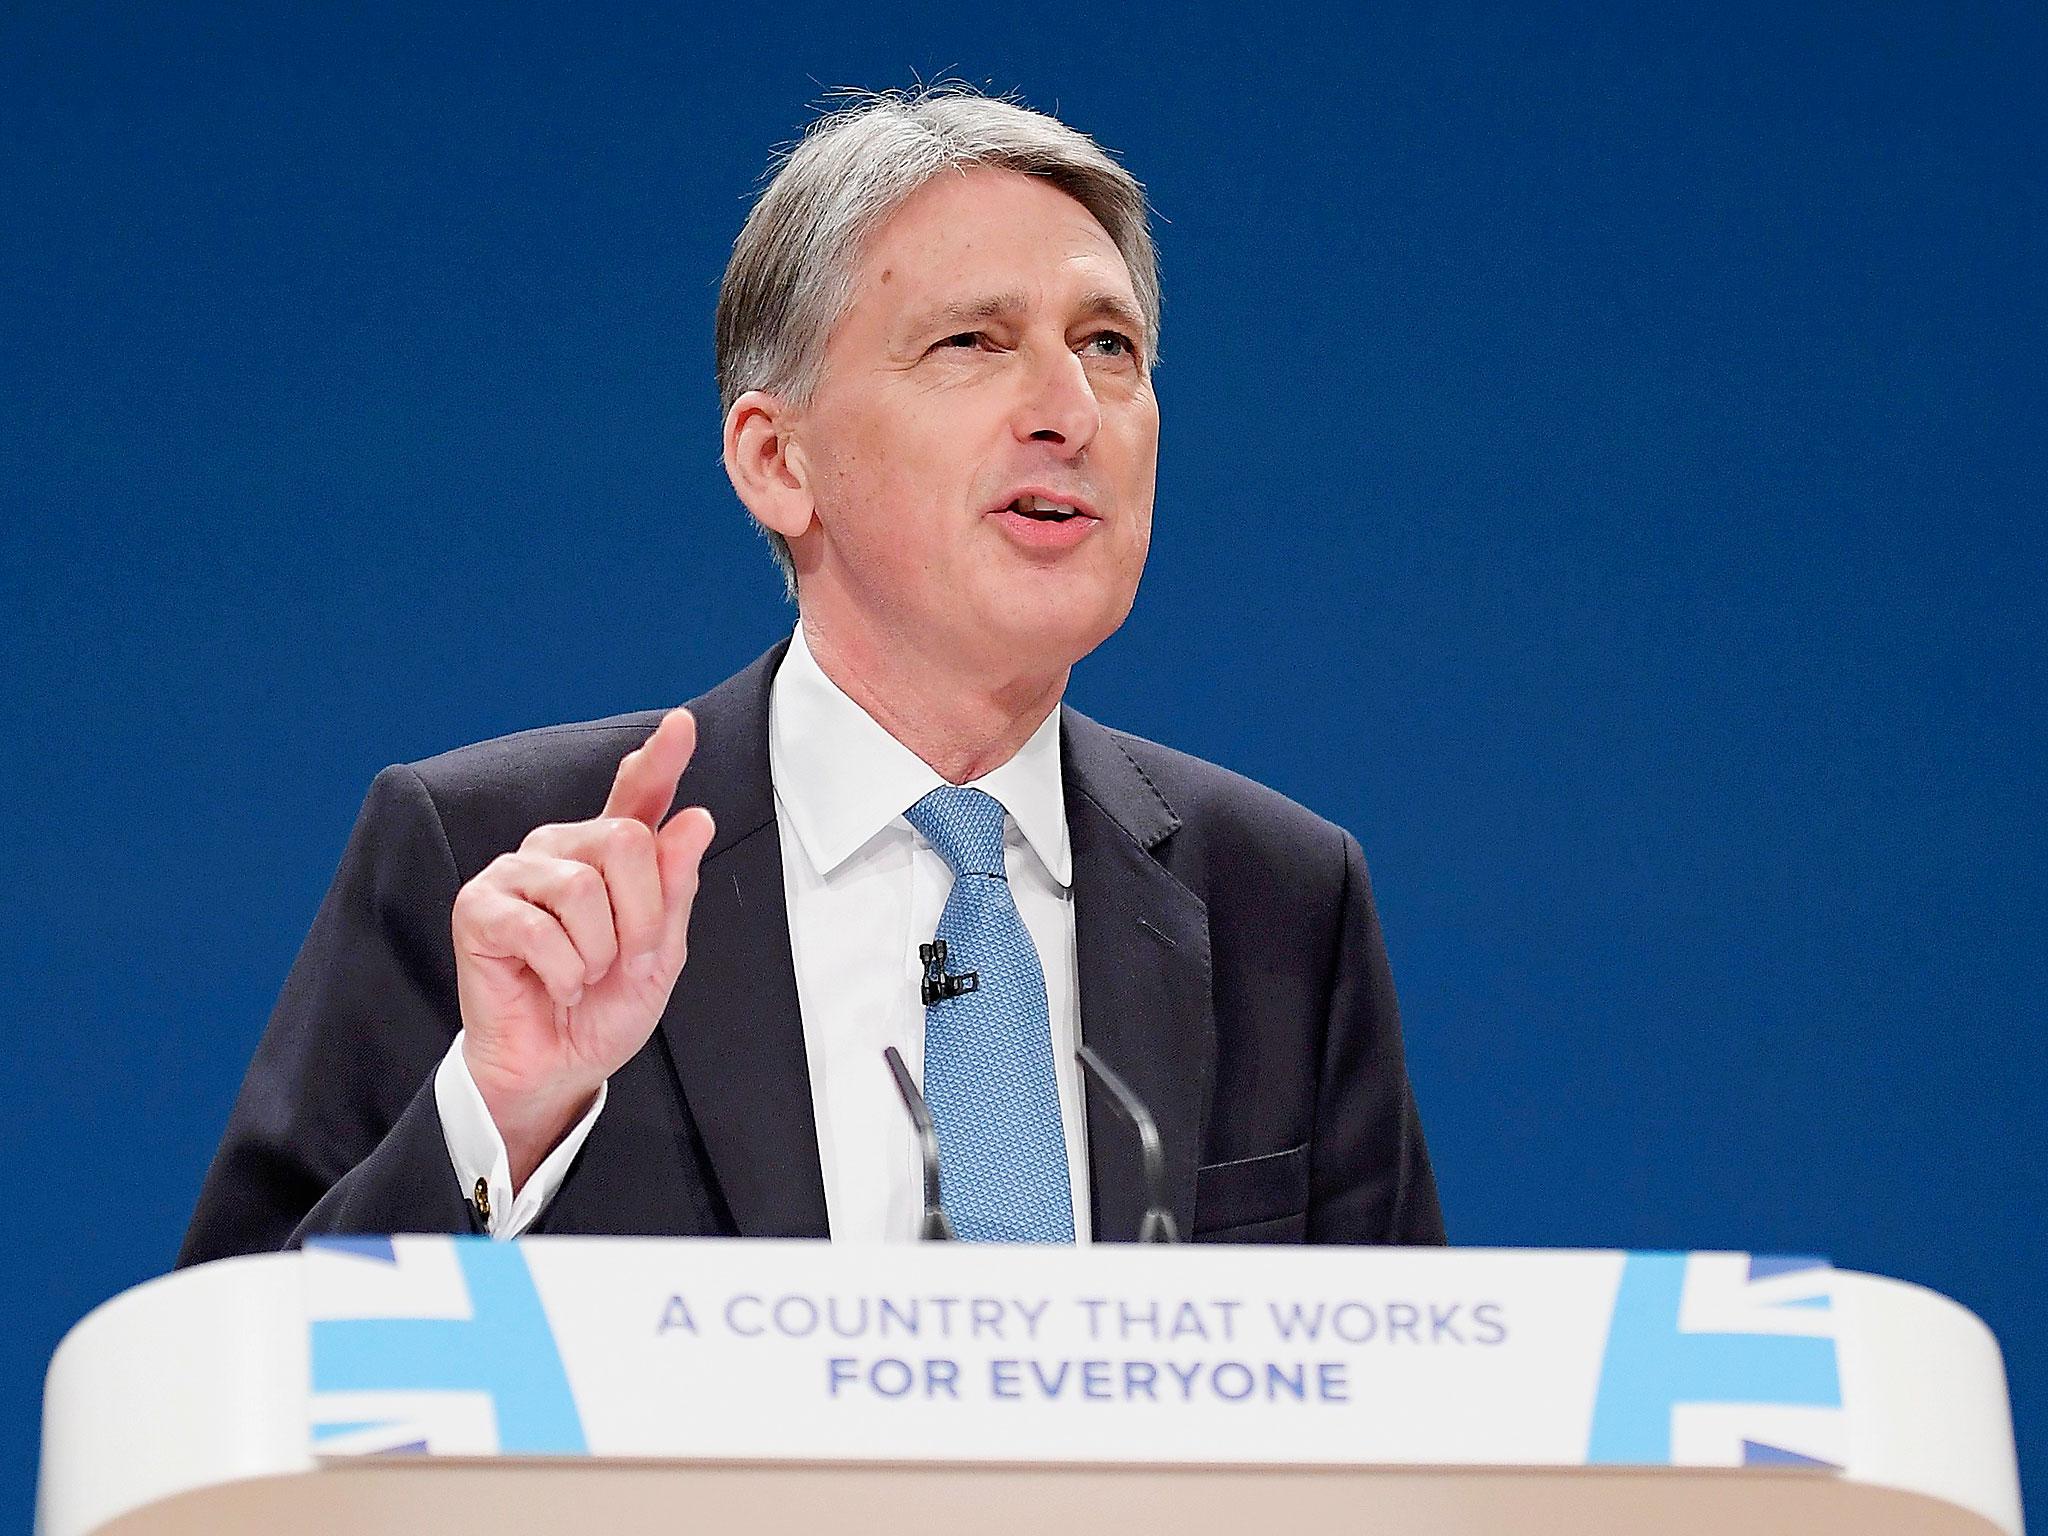 Britain's Chancellor of the Exchequer Philip Hammond speaks at the Conservative Party conference in Birmingham, England.